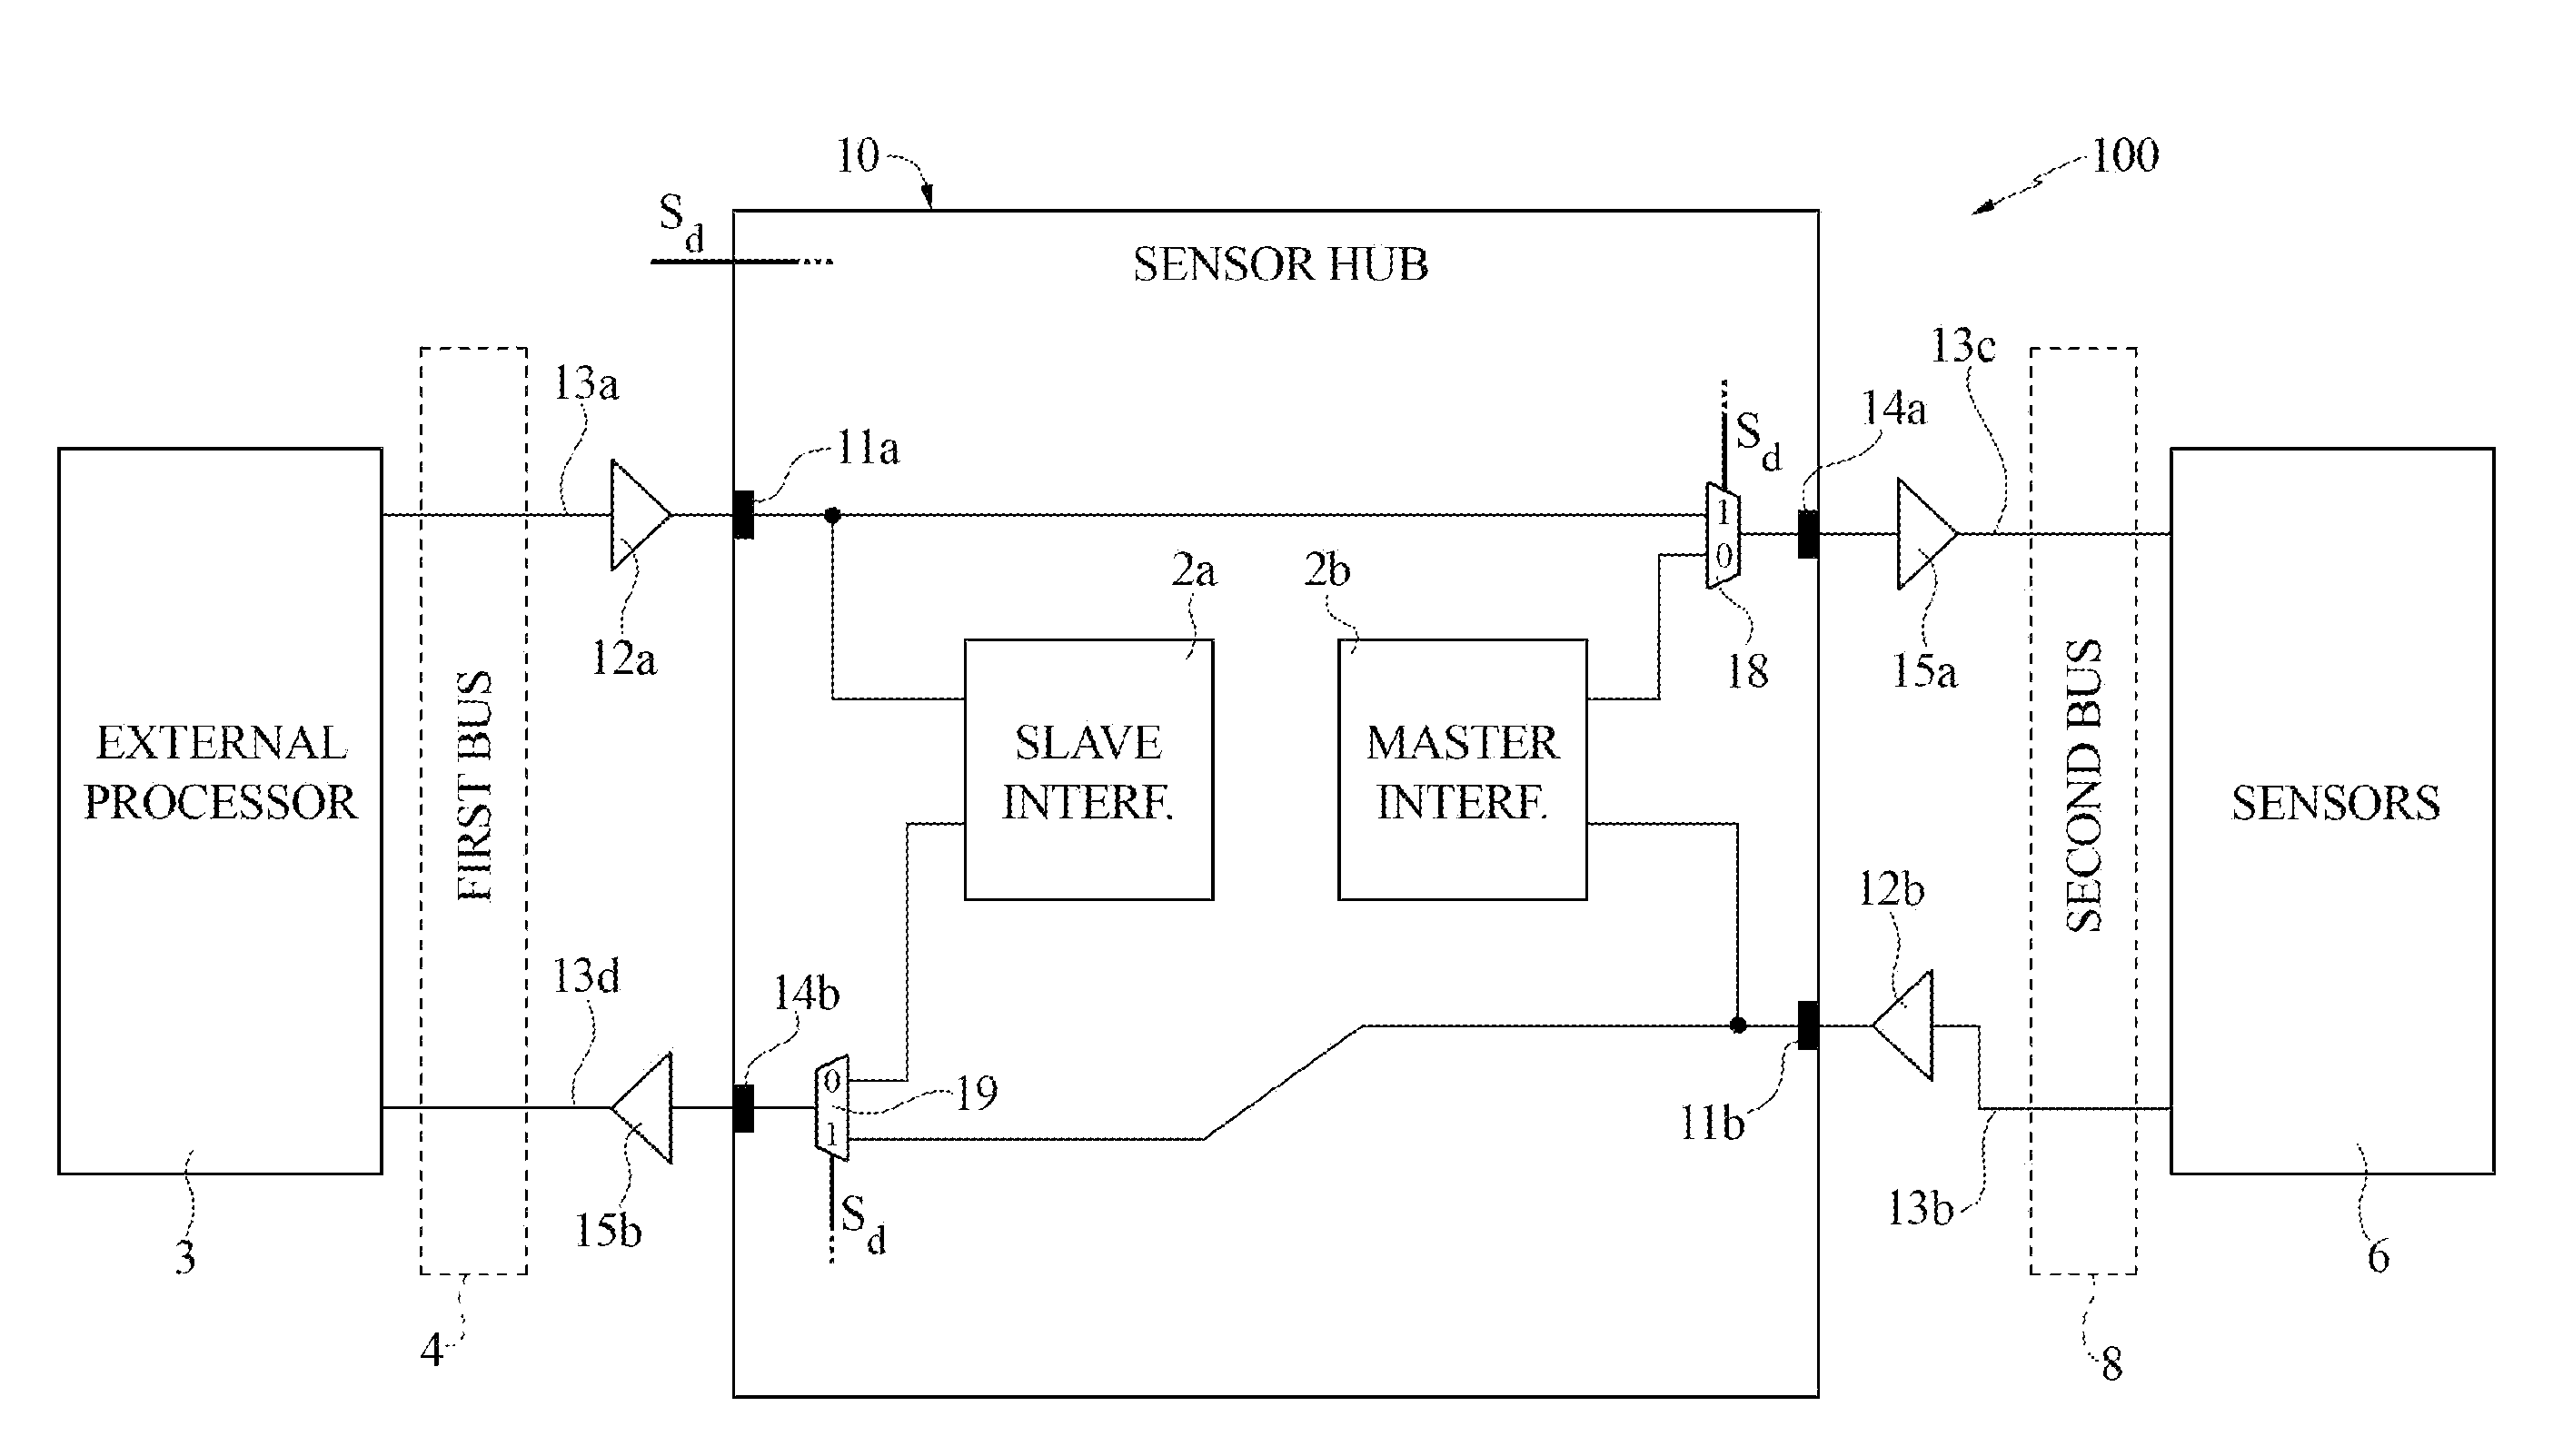 Integrated data concentrator for multi-sensor MEMS systems